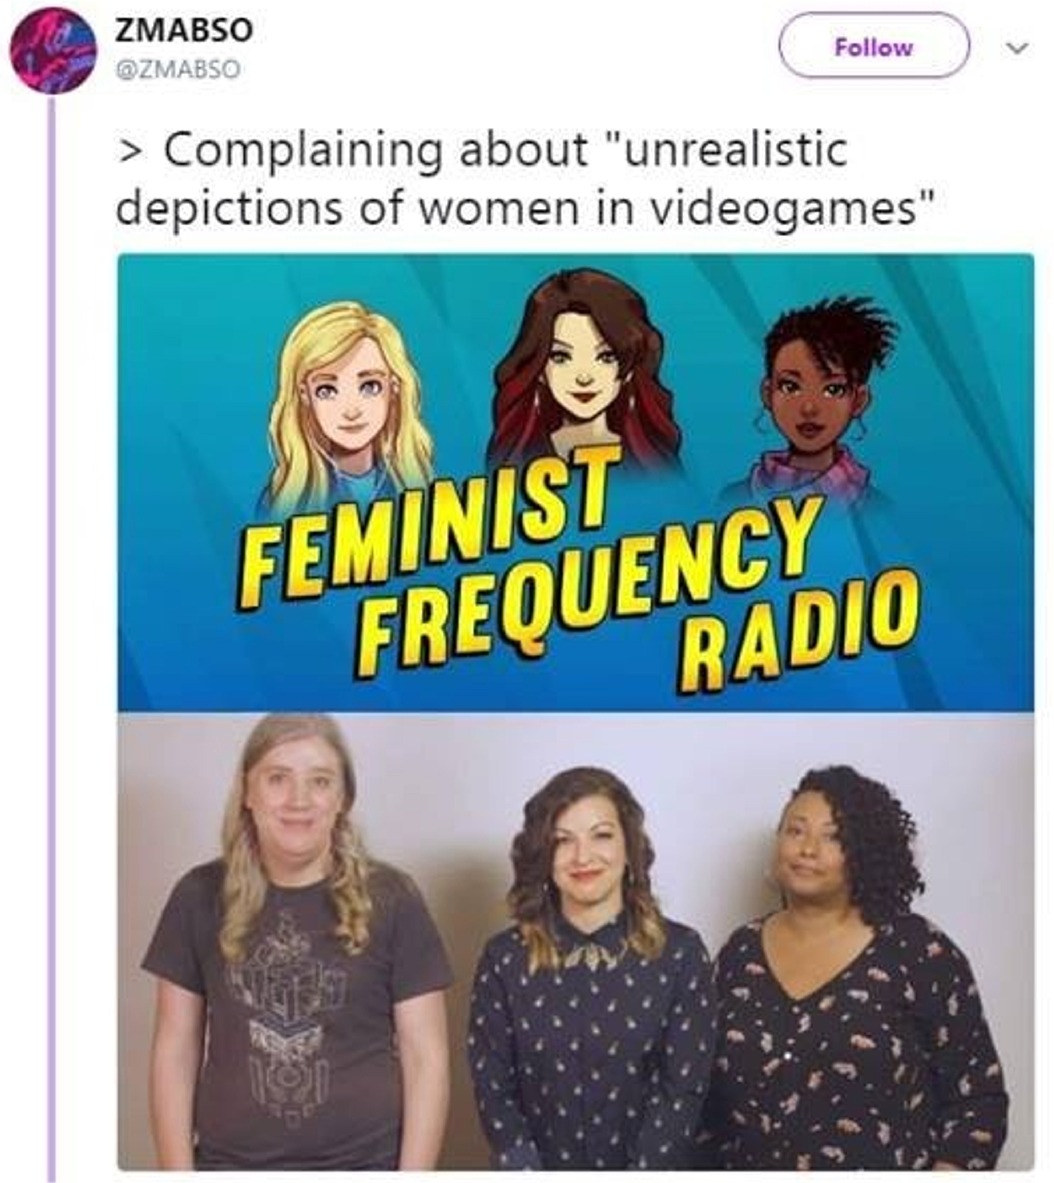 memes - feminist frequency radio - Zmabso > Complaining about "unrealistic depictions of women in videogames" Feminist Frequency Radio